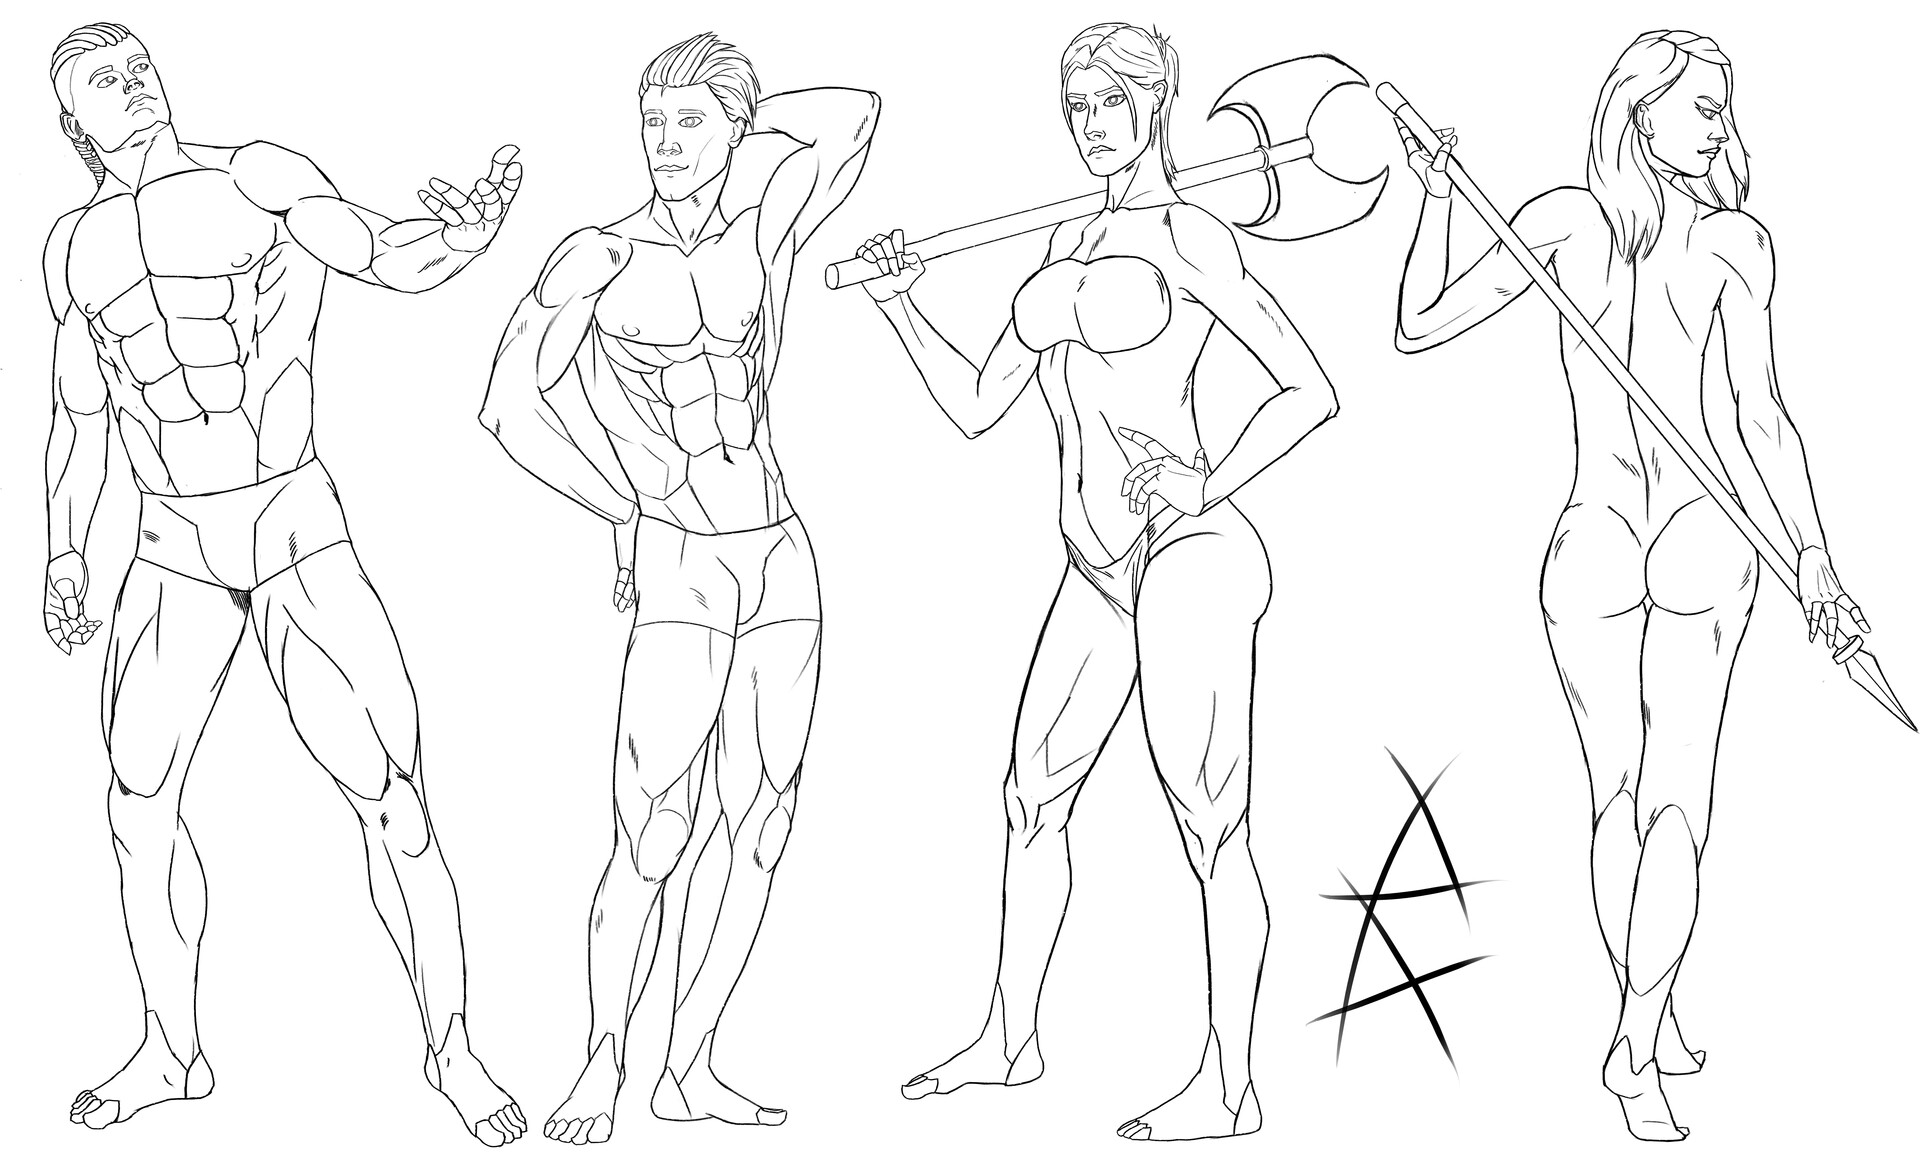 Asrion Az - Daily Figure Drawing Practice - Day 3 Practiced drawing more  complicated gestures. What do you think? | Facebook